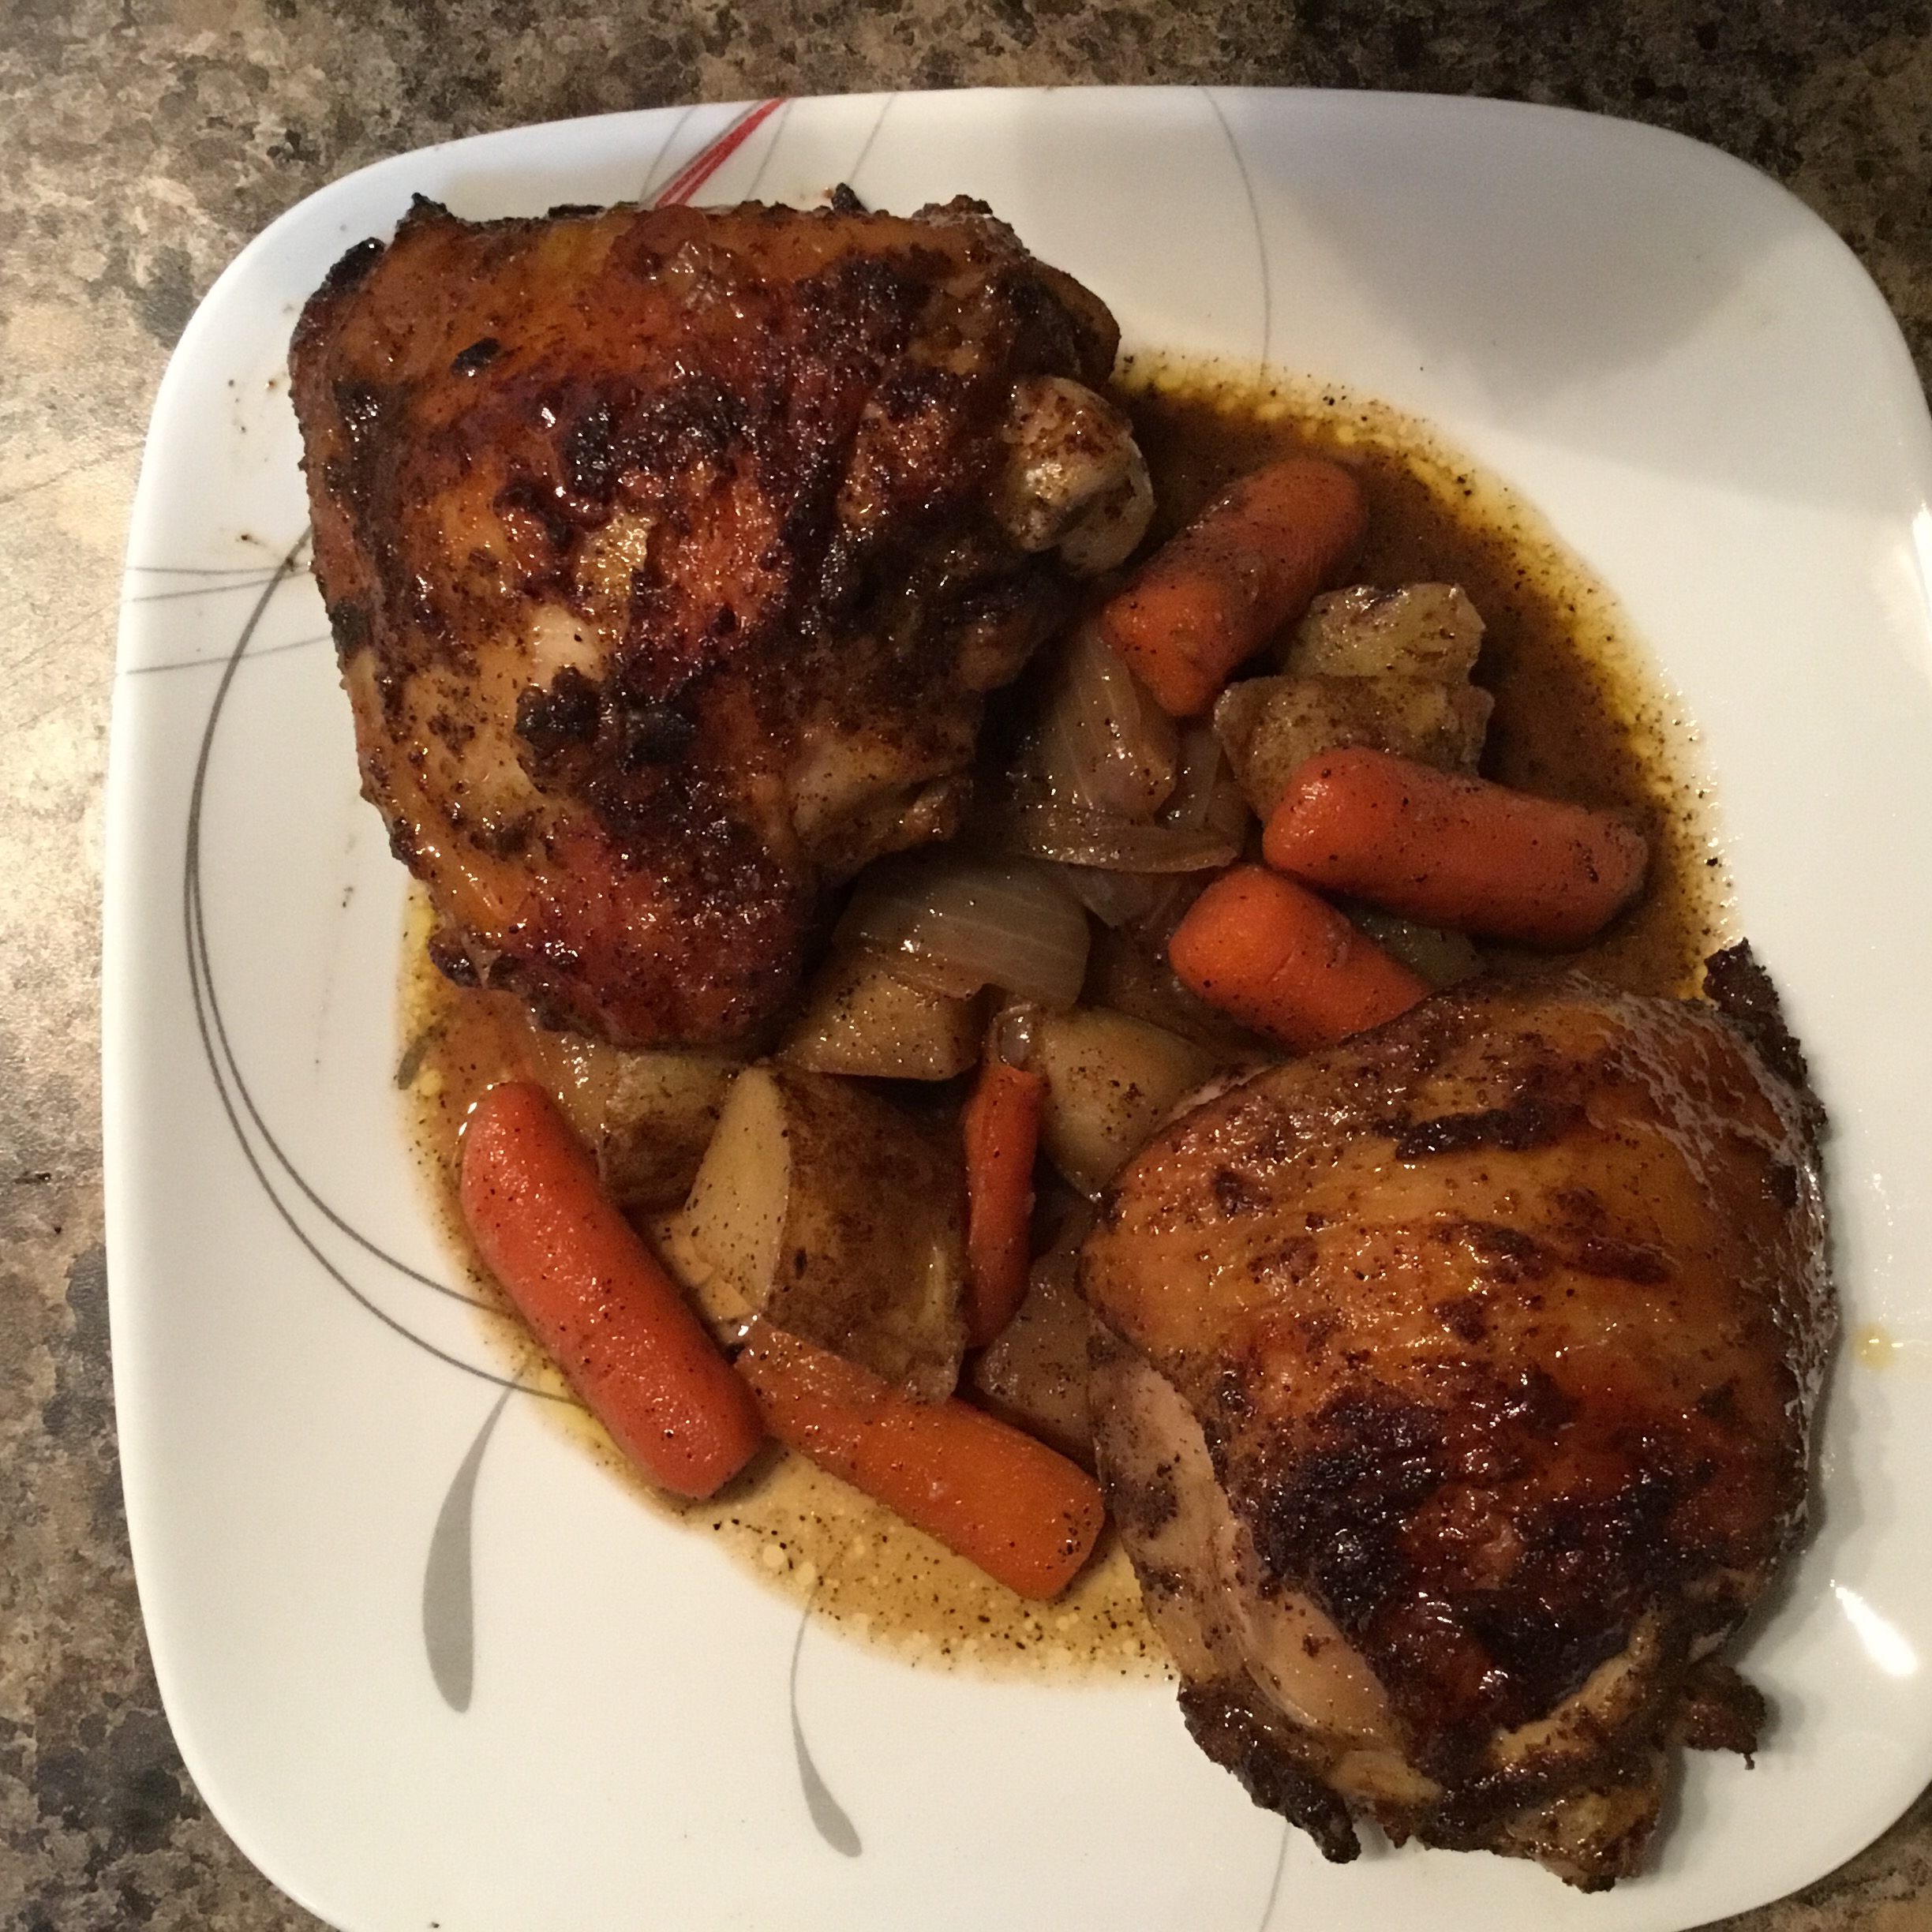 Cast Iron Honey-Sriracha Glazed Chicken with Roasted Root Vegetables 